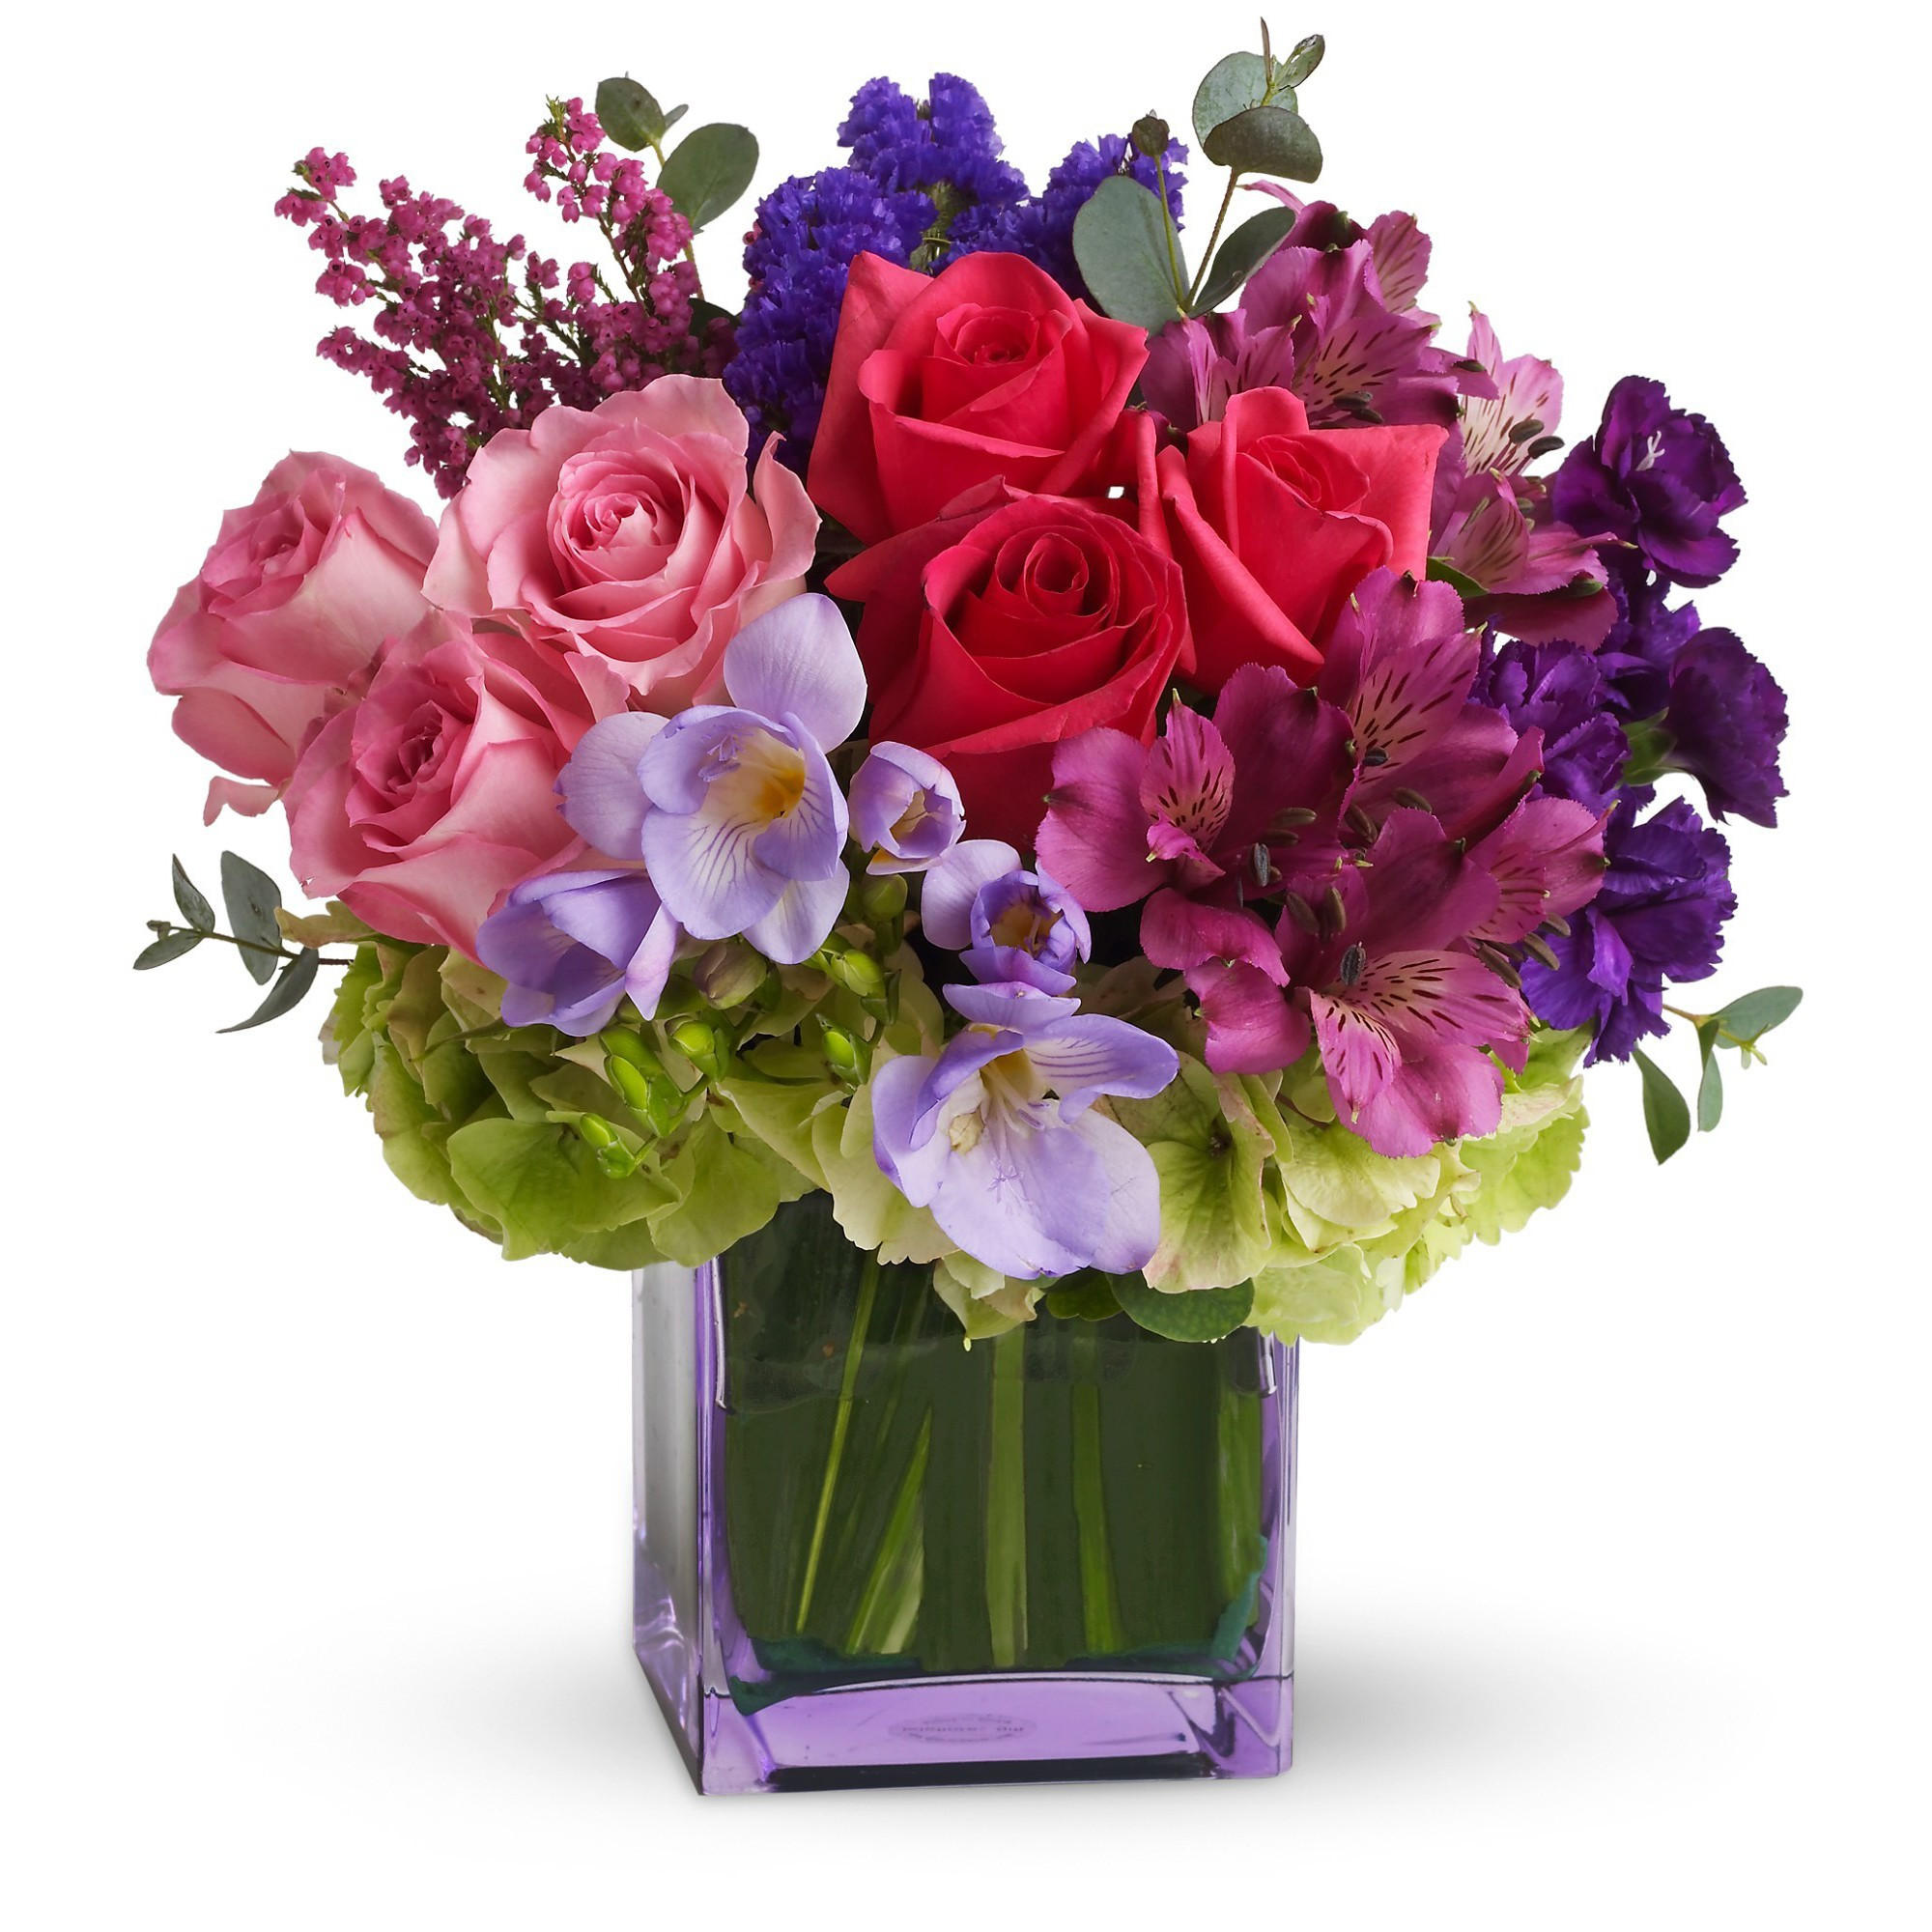 18 Lovable Personalized Vase Flower Delivery 2024 free download personalized vase flower delivery of flowers delivery peoria prospect florist throughout exquisite beauty